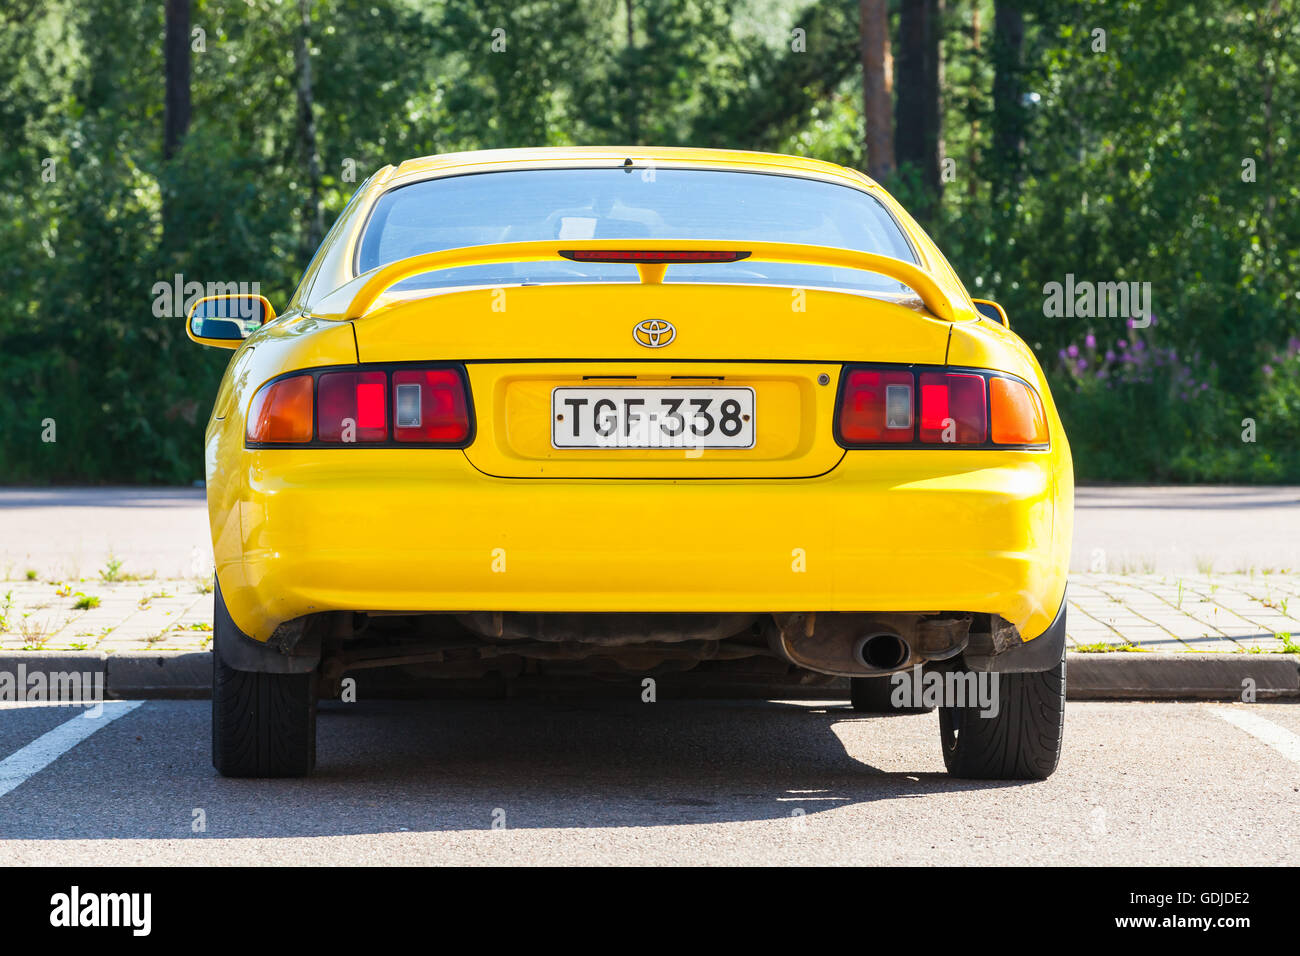 Kotka, Finland - July 16, 2016: Bright Yellow Facelift Toyota Celica GT liftback T200 model of 1994-1999, close up rear view Stock Photo